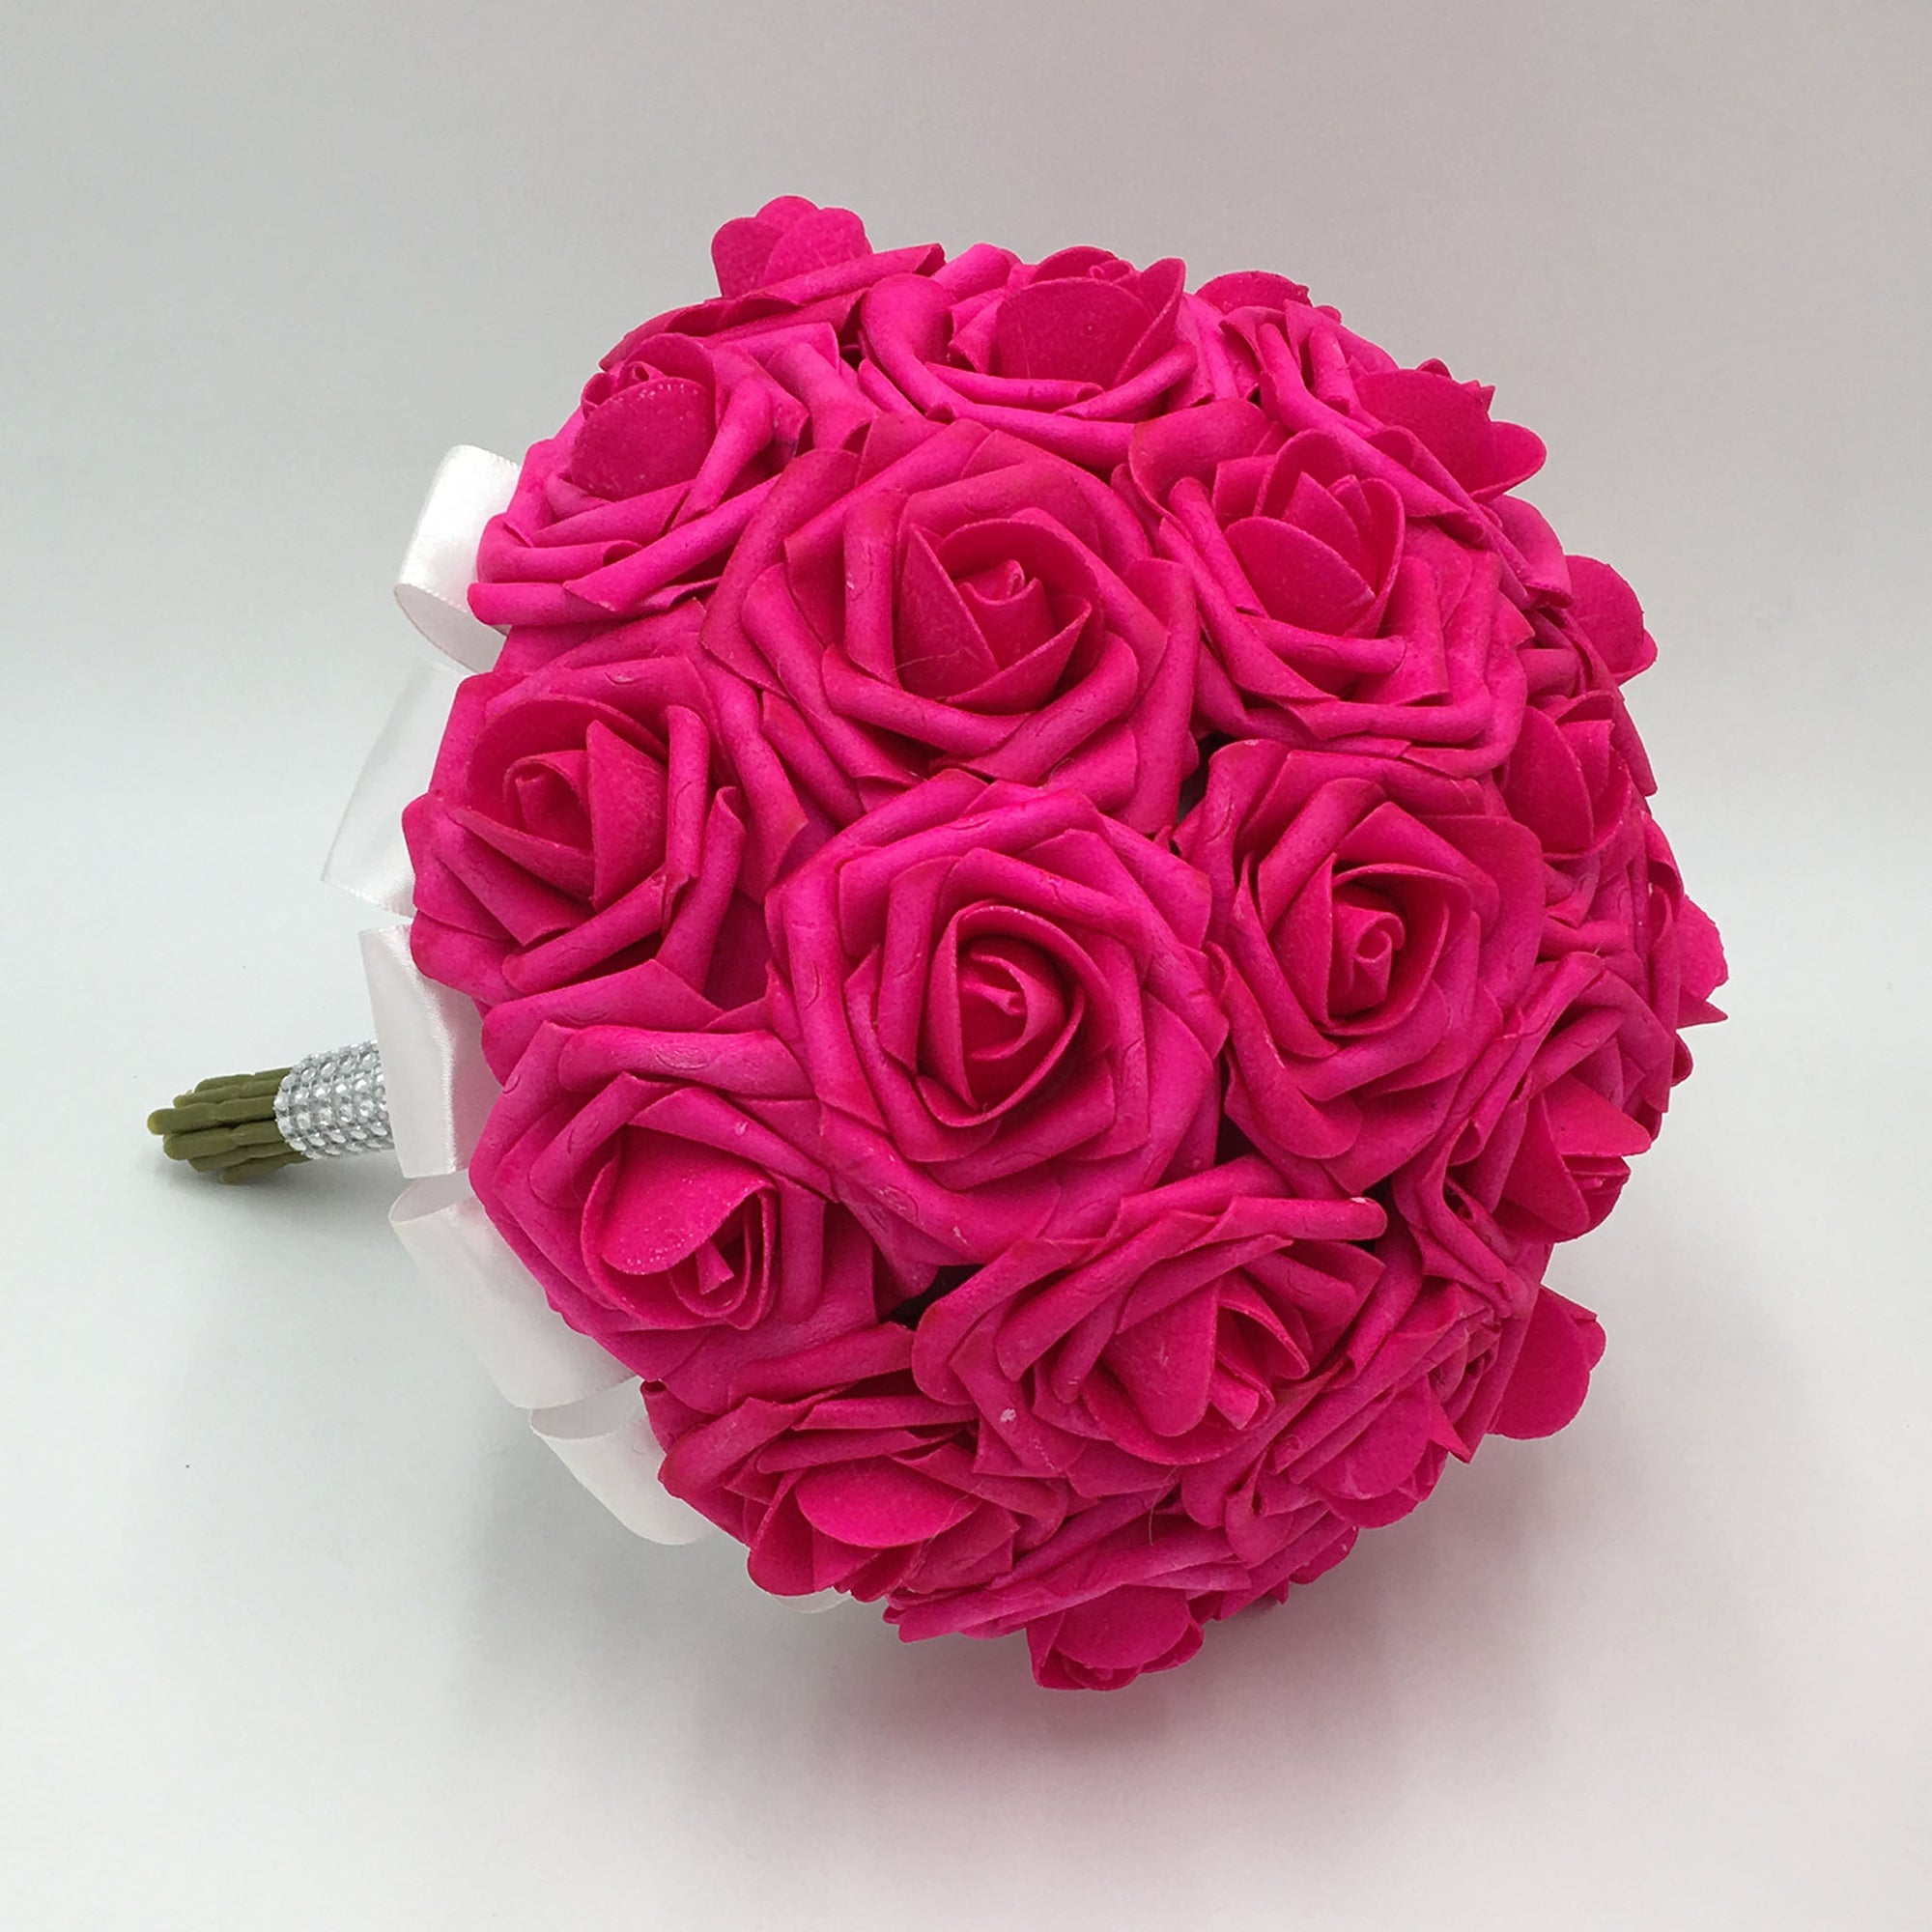 Hot Pink Bridal Bouquet White Bouquet of Rose for Bridesmaid